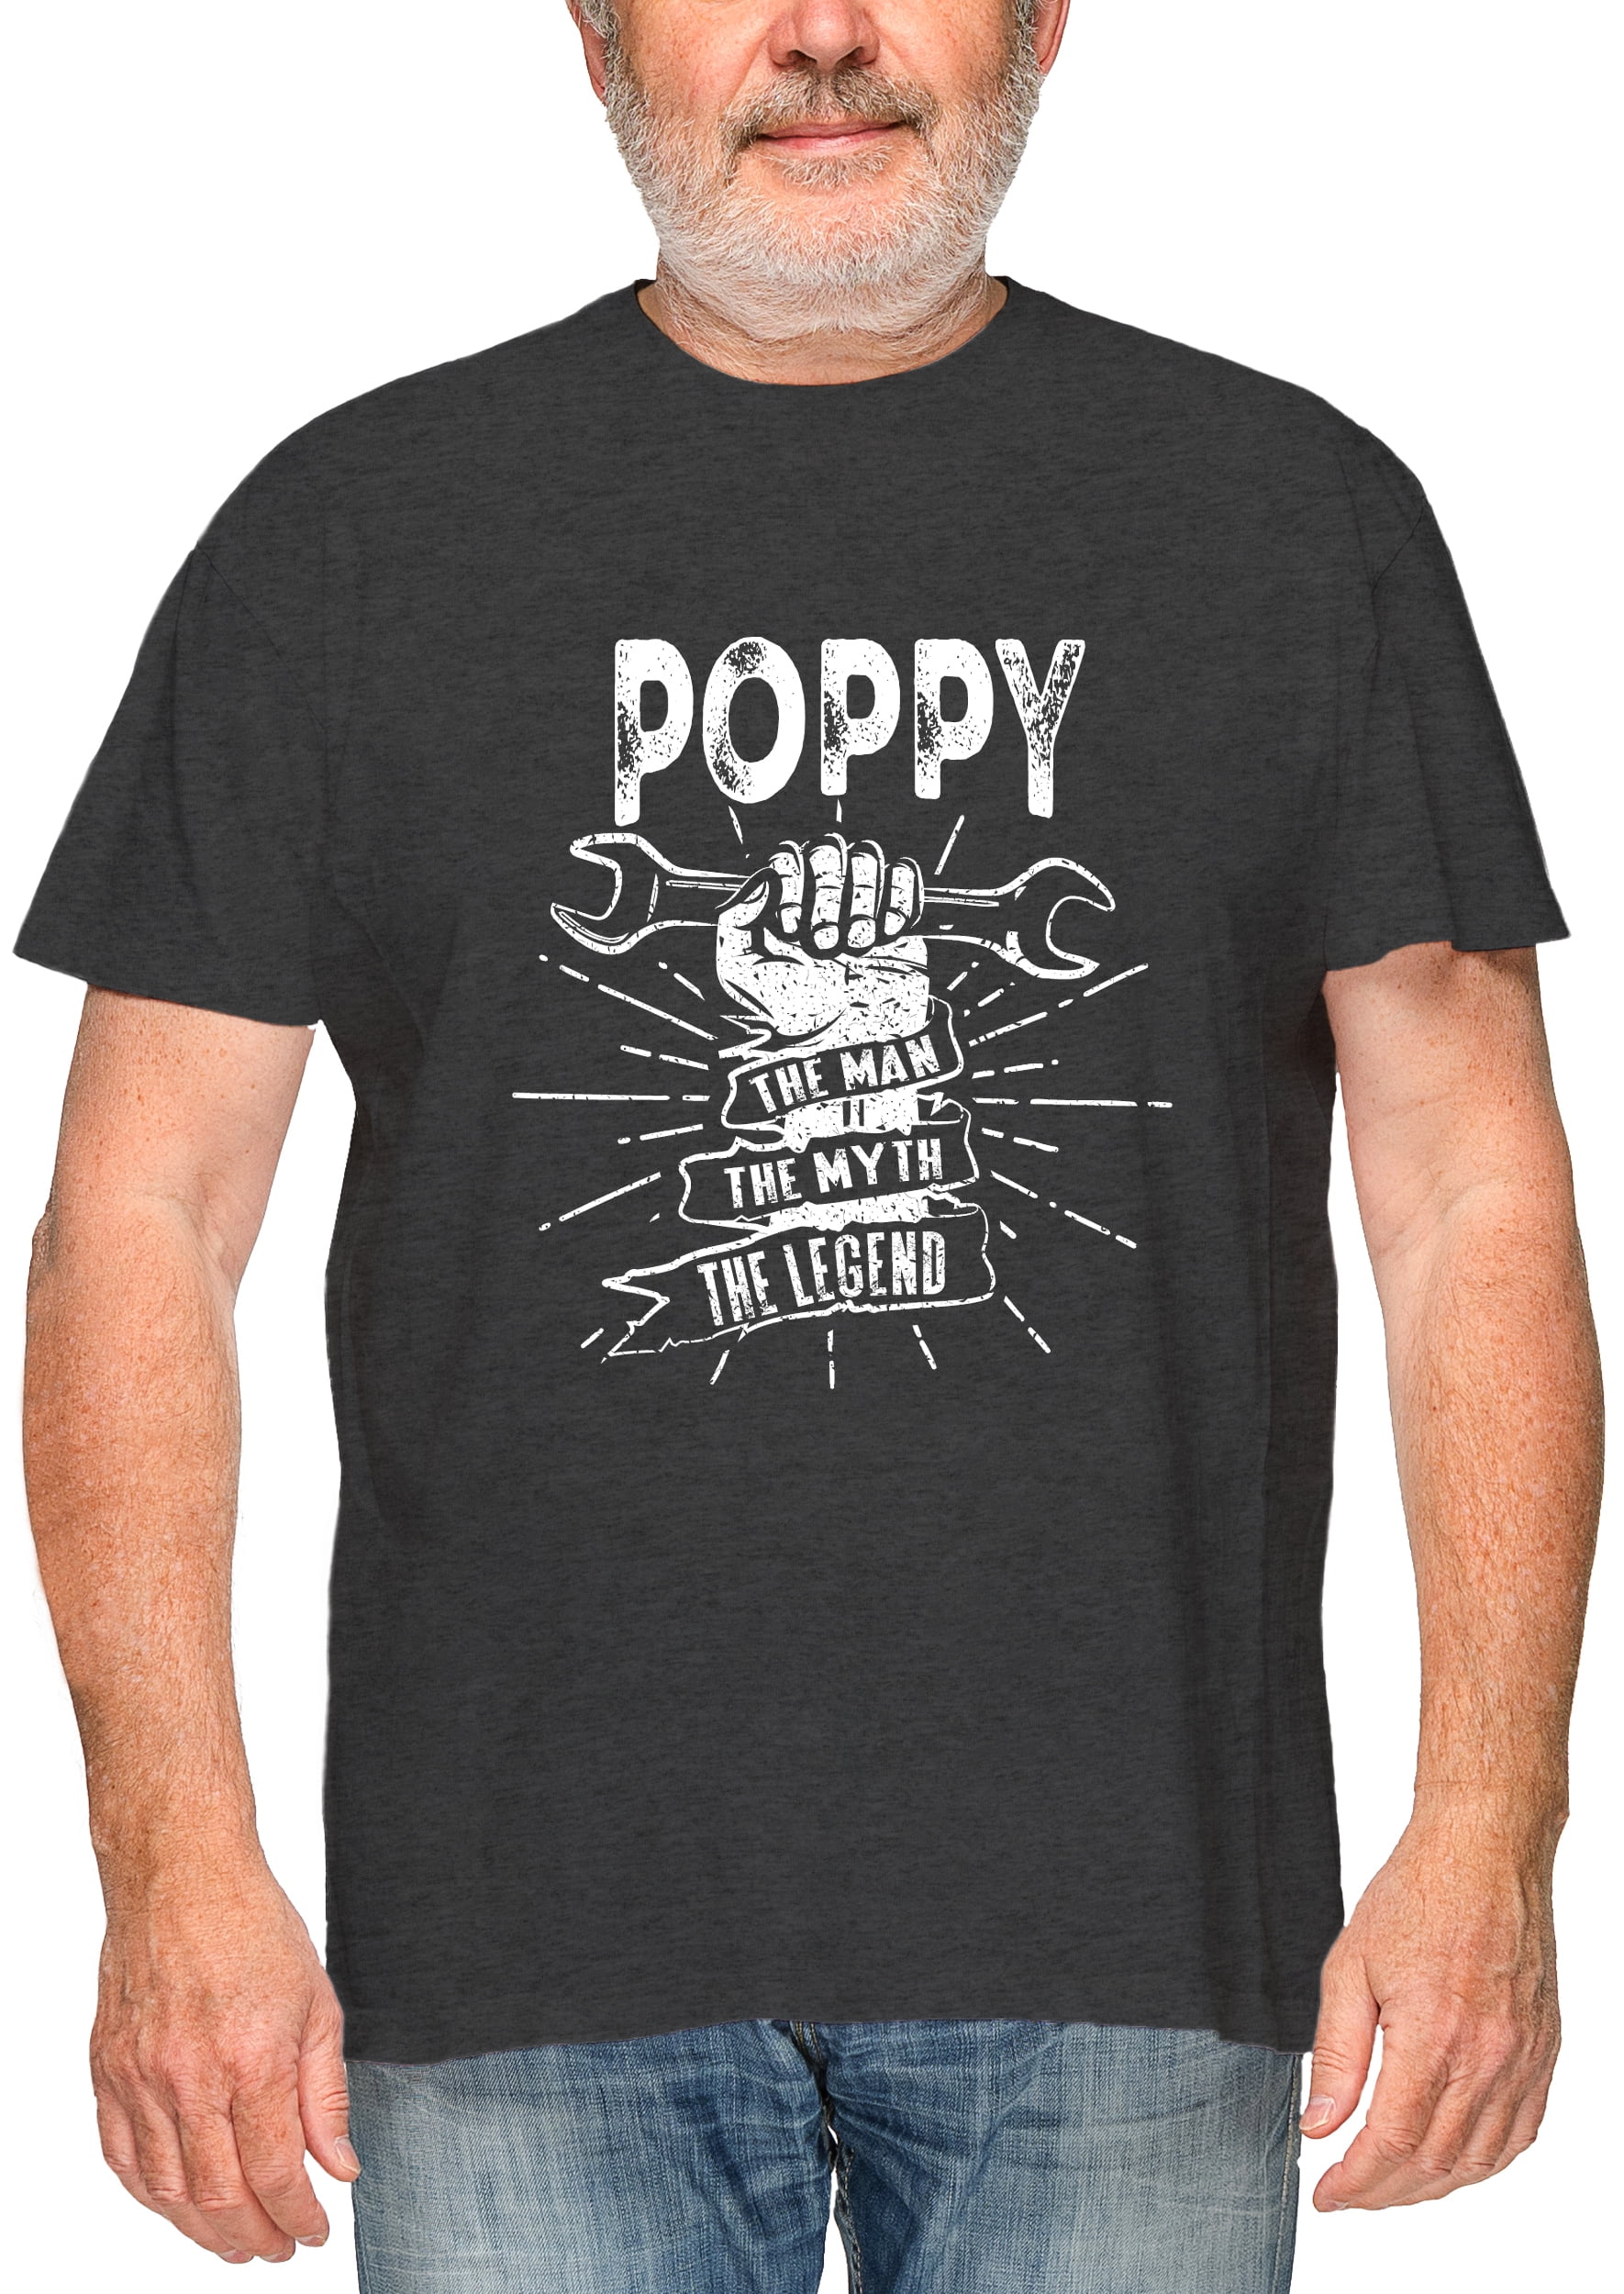 Poppy The Man The Myth The Legend New Men's Shirt Vintage Stylish Casual Top Tee 